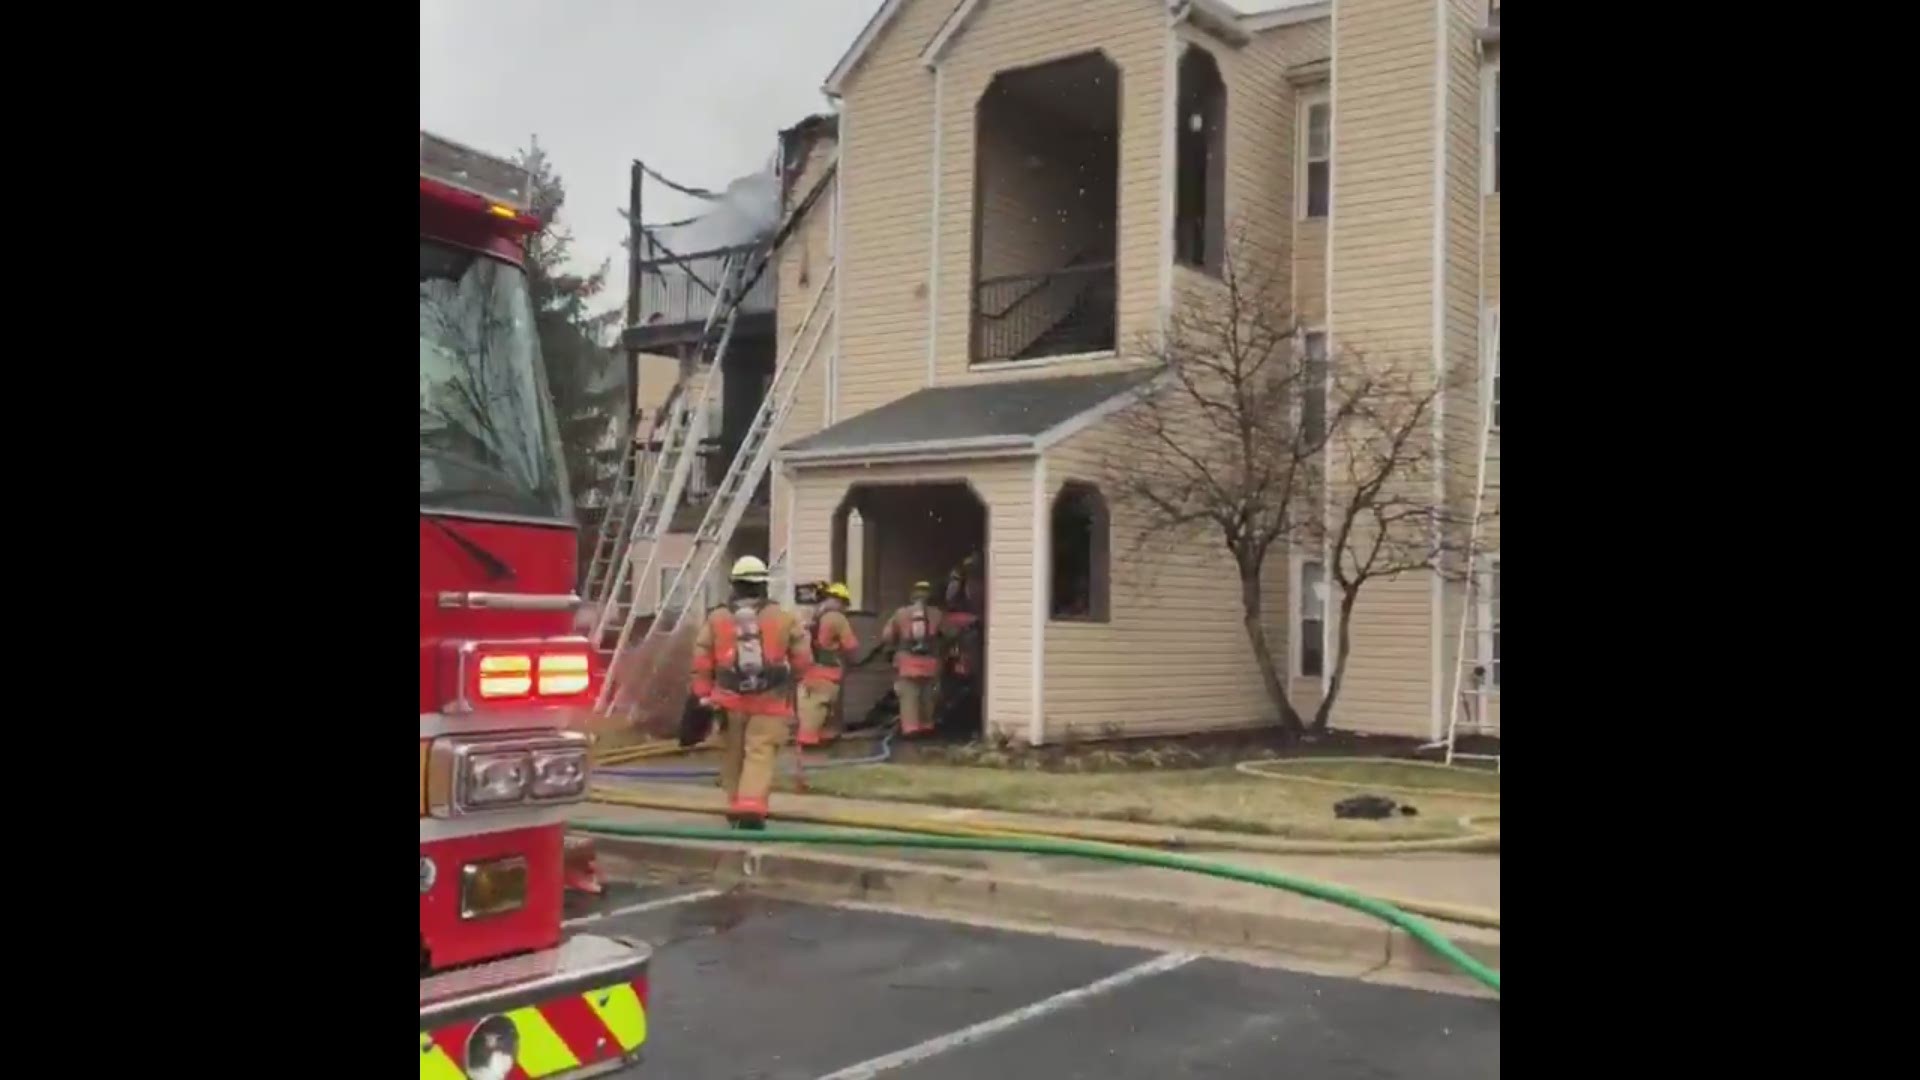 Several families were displaced Friday afternoon after an apartment fire in Gaithersburg, Md.